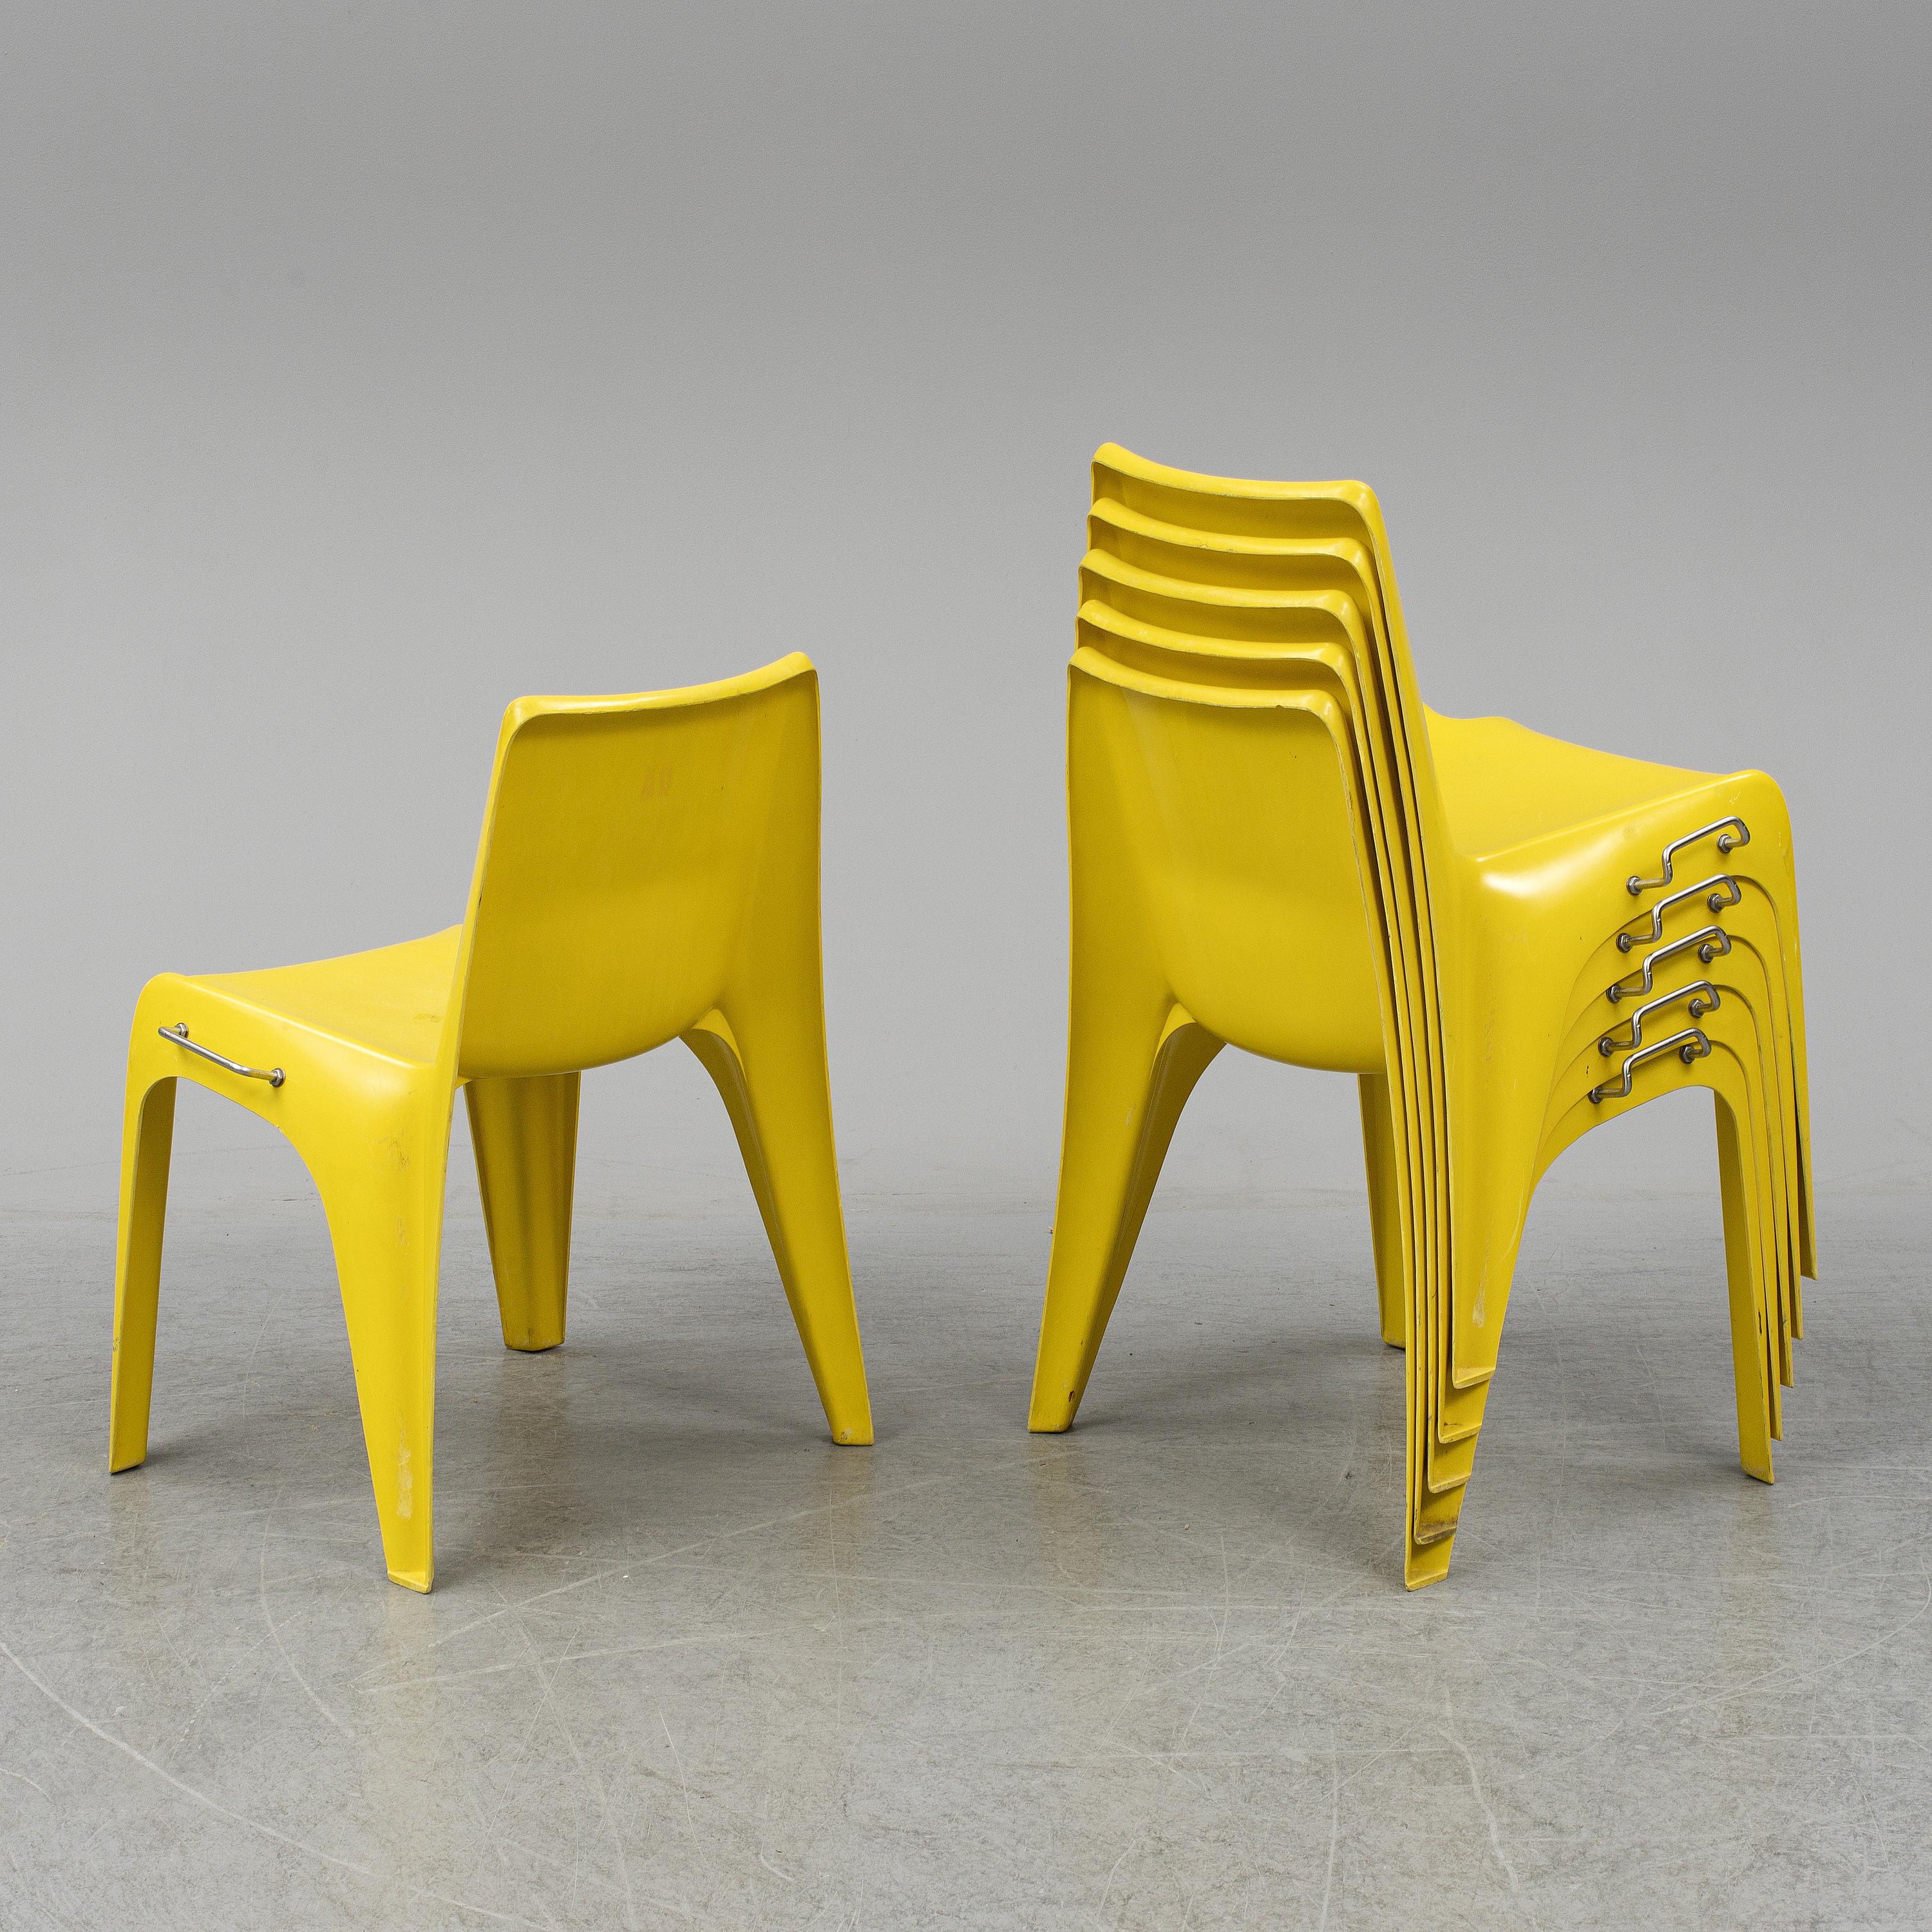 Mid-Century Modern Stackable Bofinger Yellow Chairs by Helmut Batzner, First Edition, Set of 6 For Sale